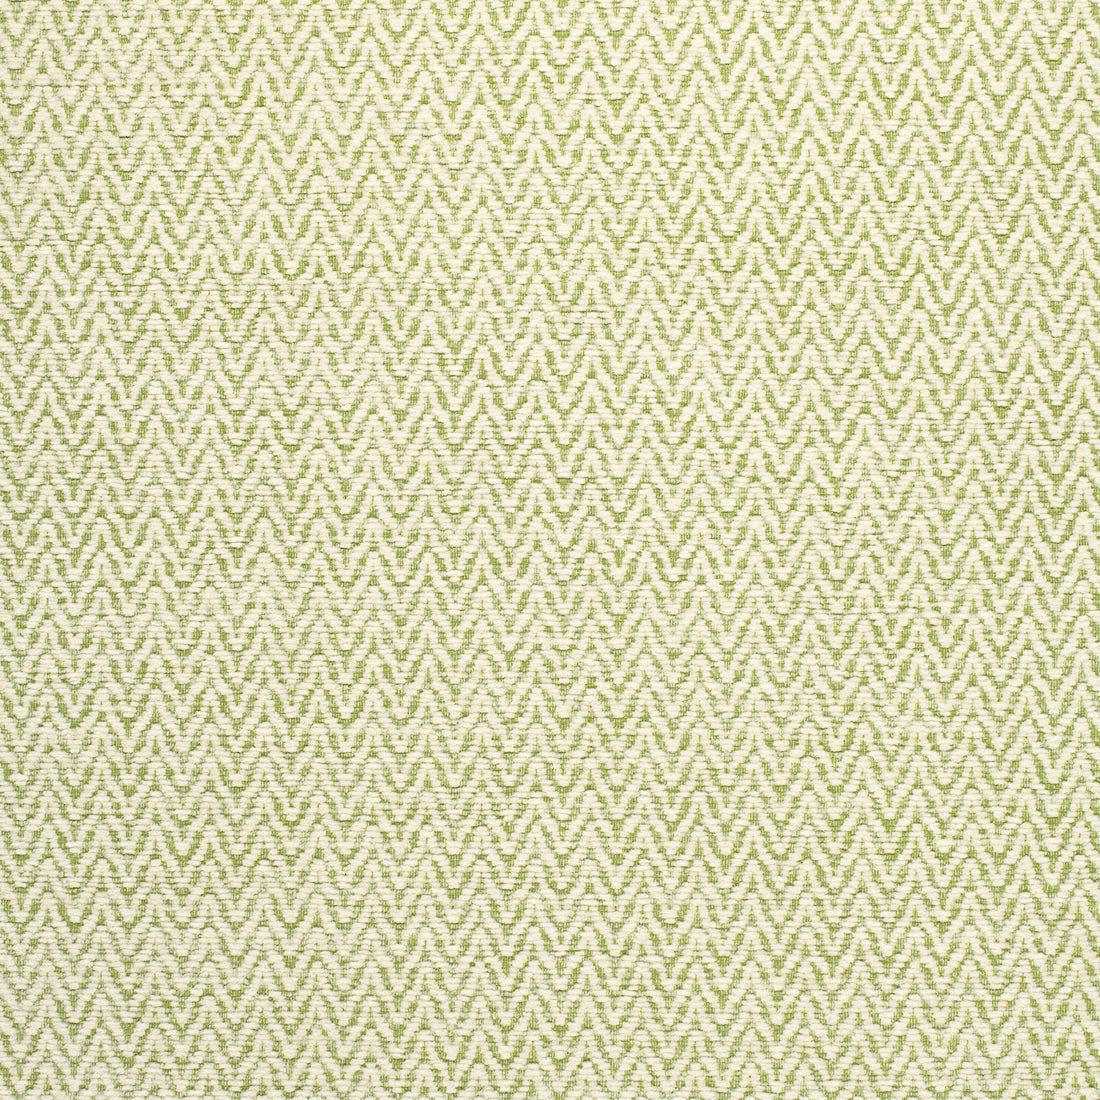 Beatrix fabric in green apple color - pattern number W80600 - by Thibaut in the Pinnacle collection